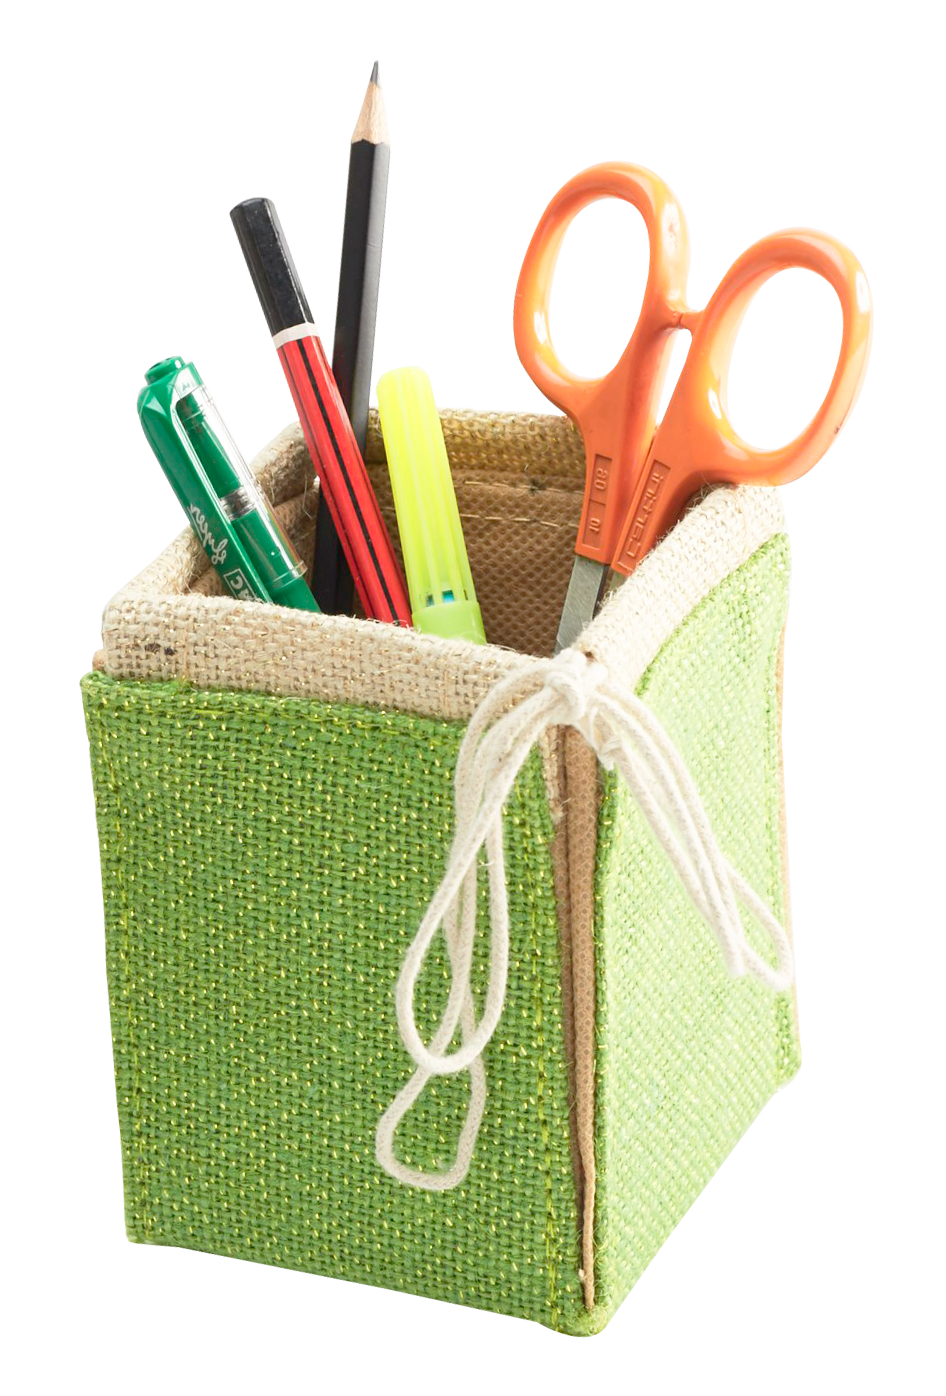 Pen Stand PNG Image